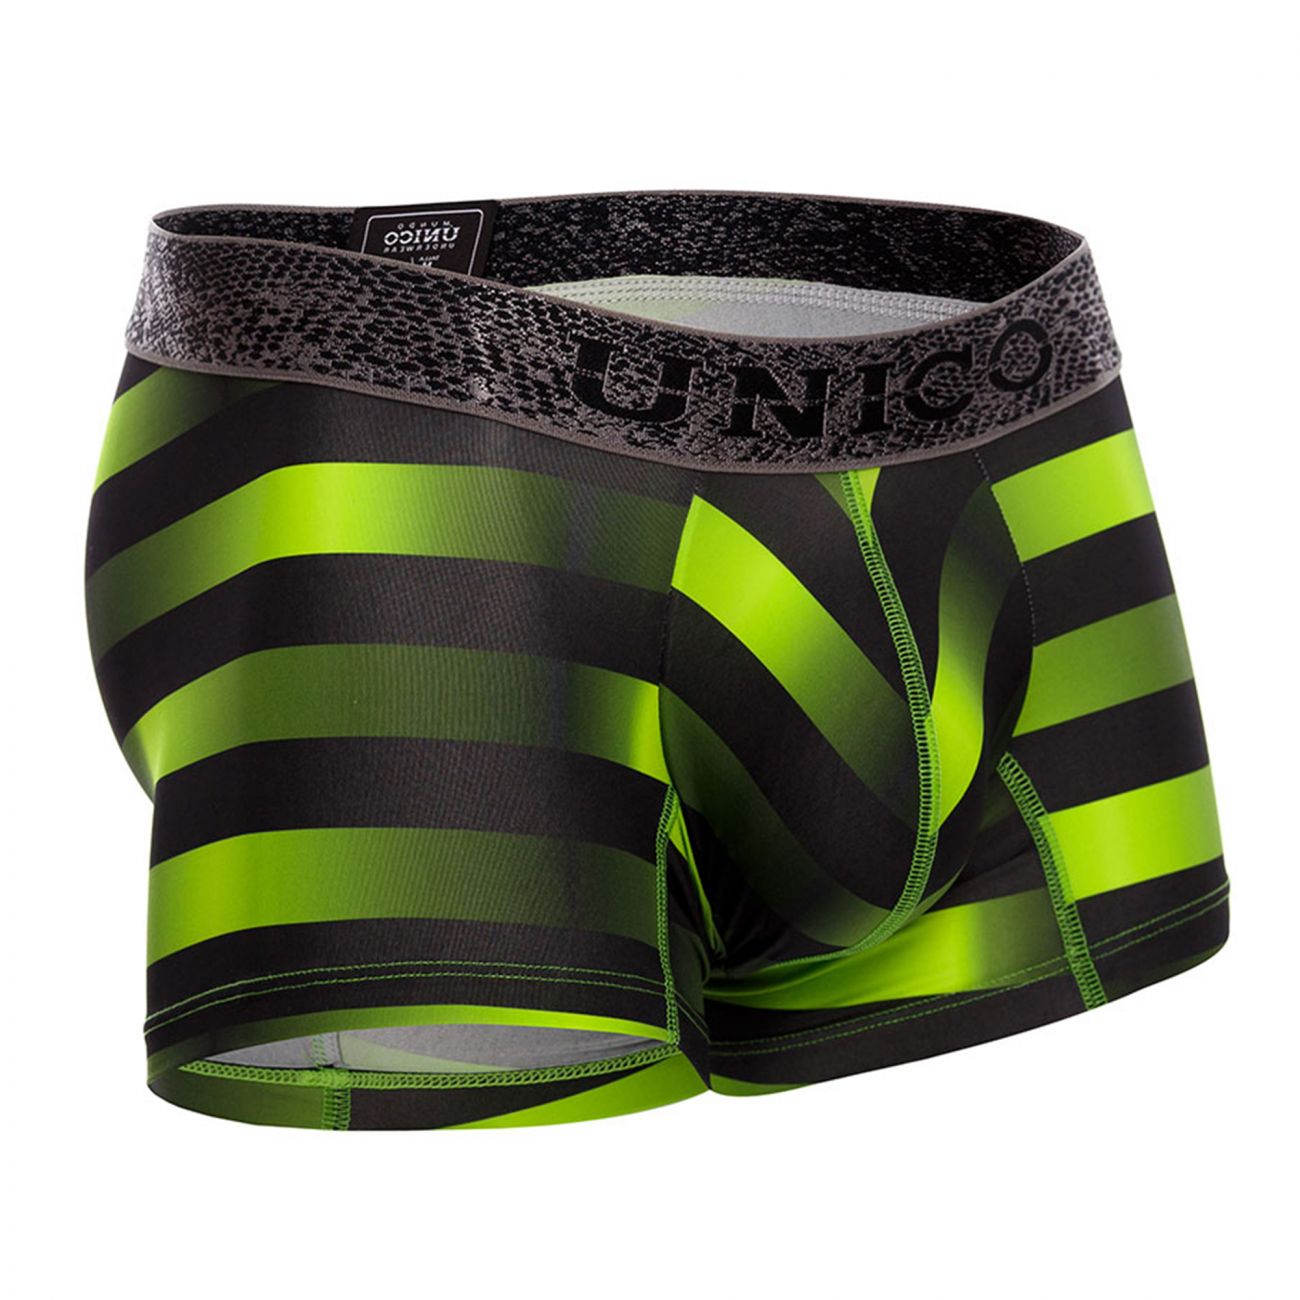 Unico 21070100105 Hive Trunks Color 90-Green